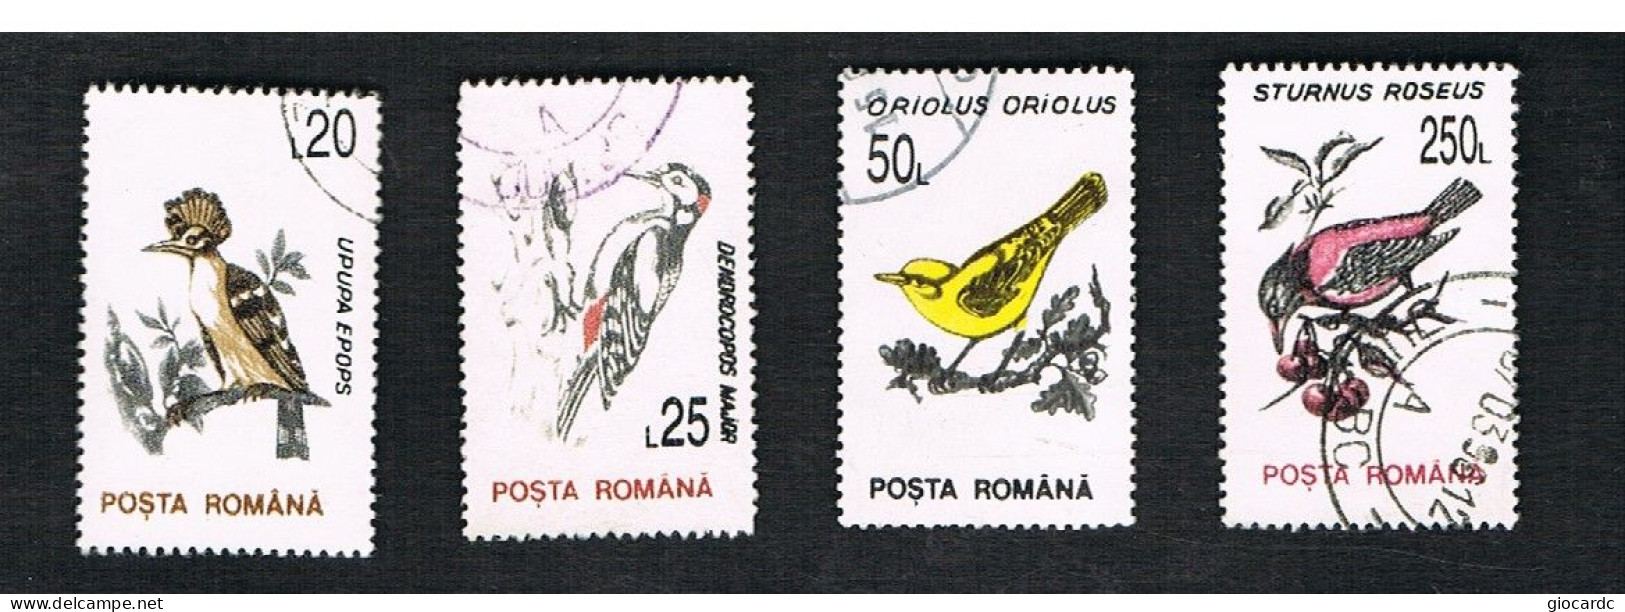 ROMANIA - SG 5510.5509  - 1993  CURRENT SERIE: BIRDS (4 STAMPS OF THE SET ON WHITE PAPER)  - USED ° - - Oblitérés